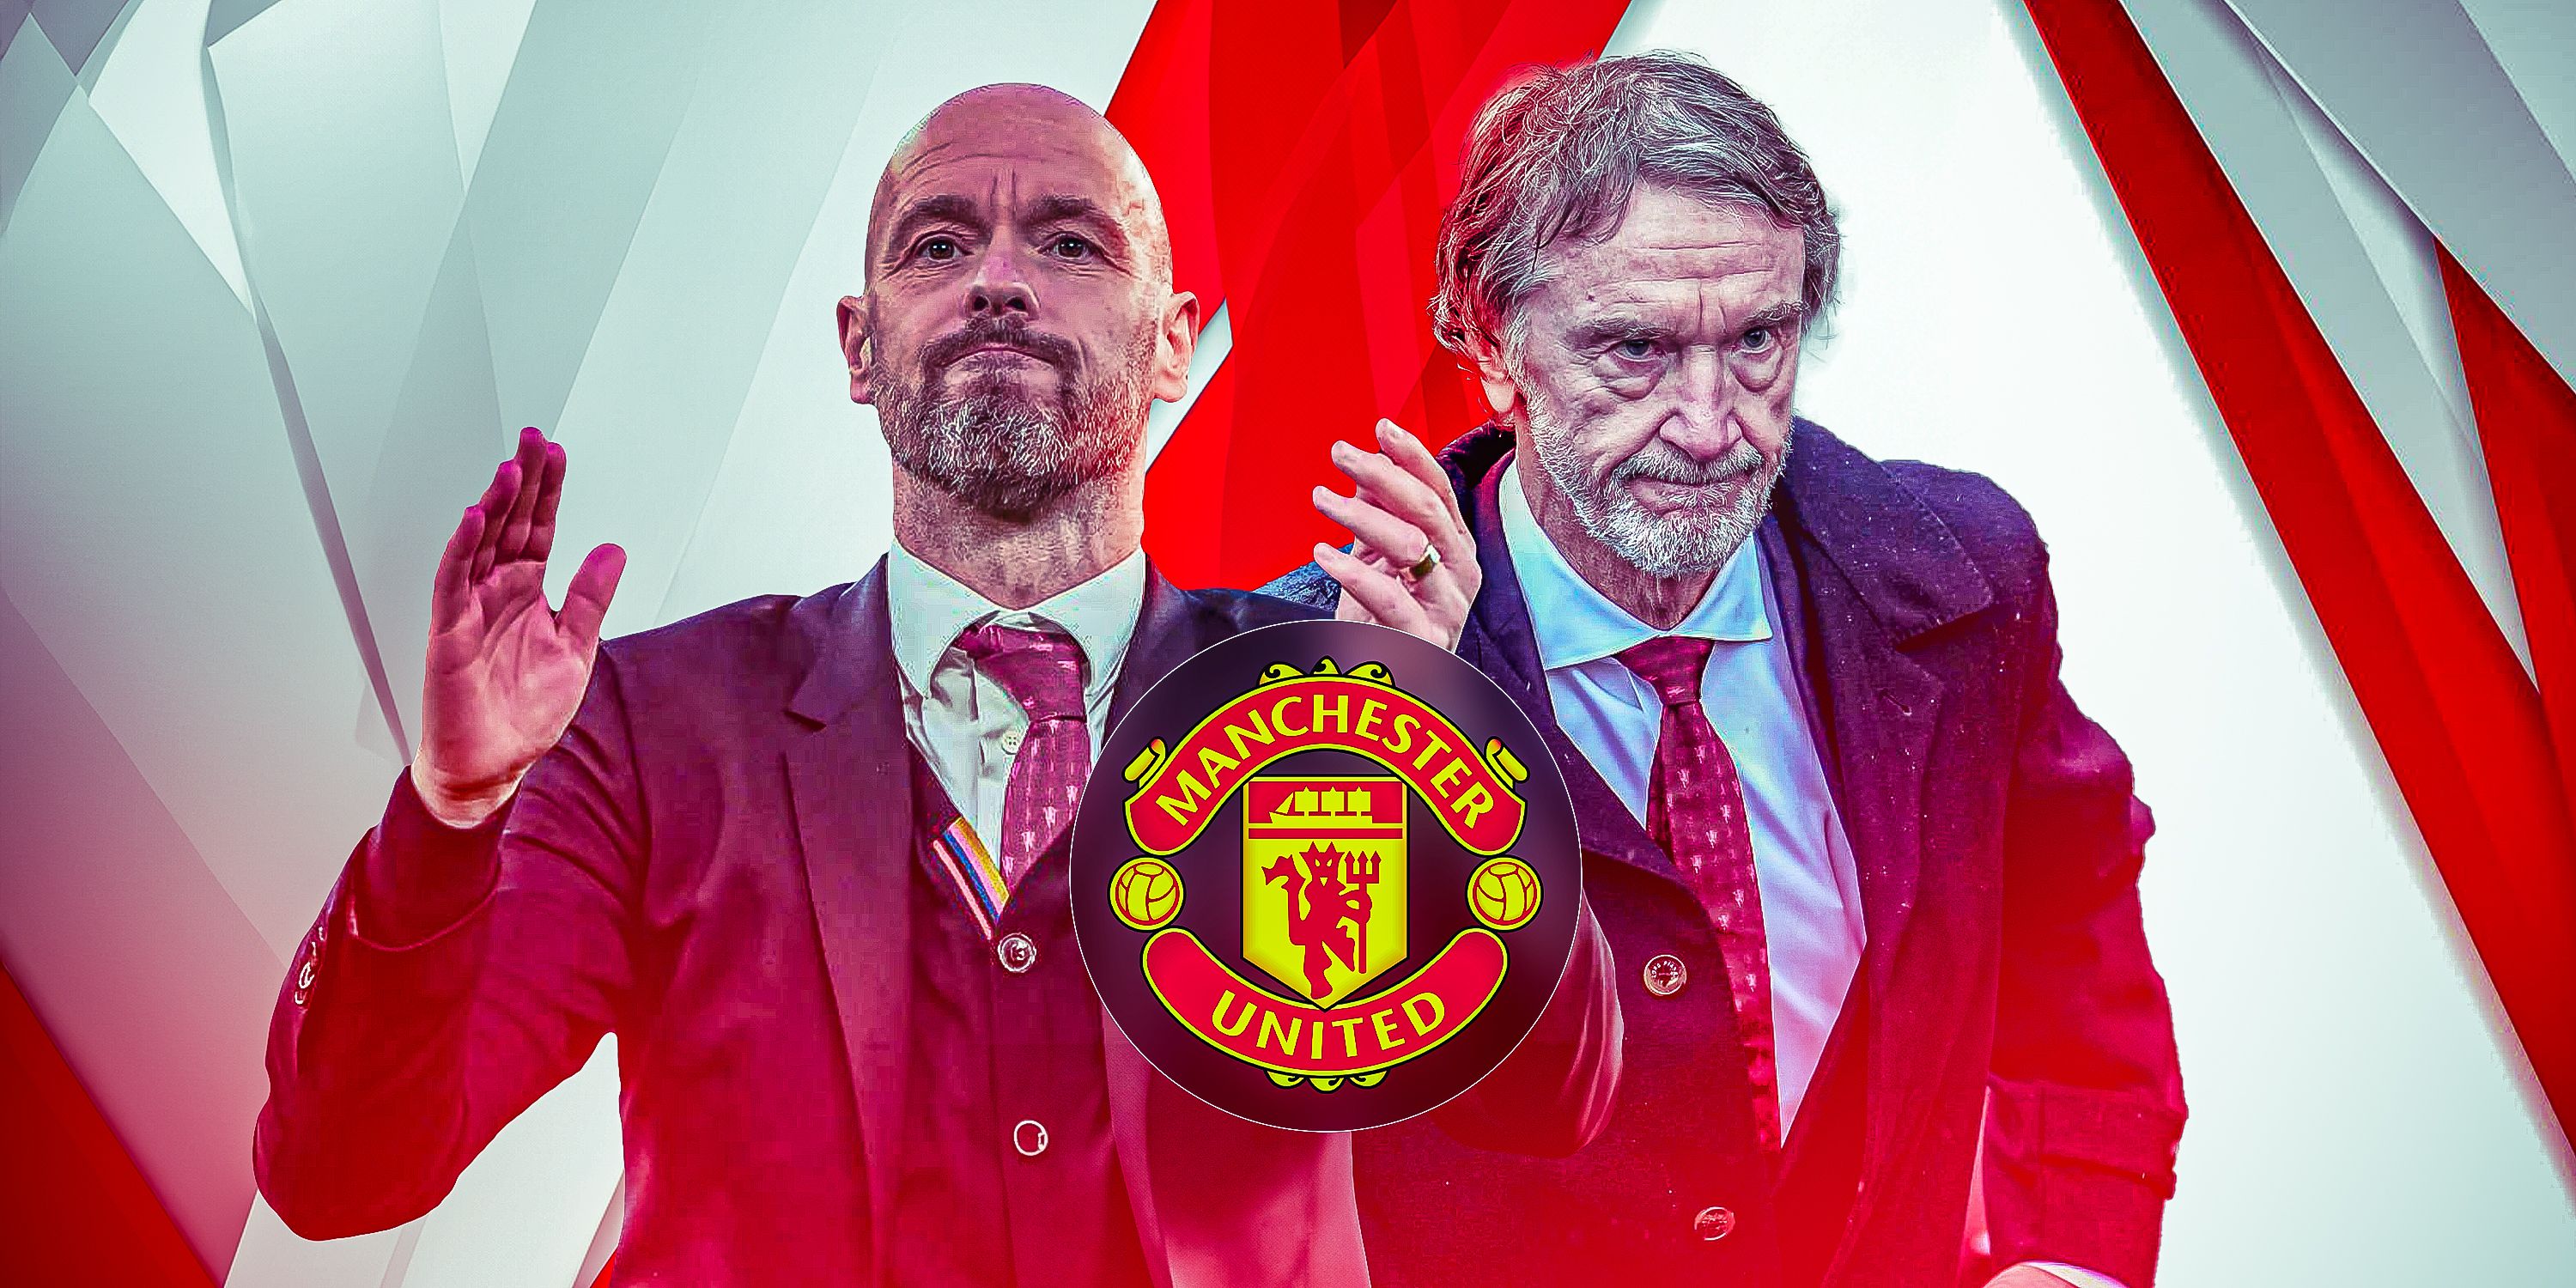 Manchester United manager Erik ten Hag and minority owner Sir Jim Ratcliffe